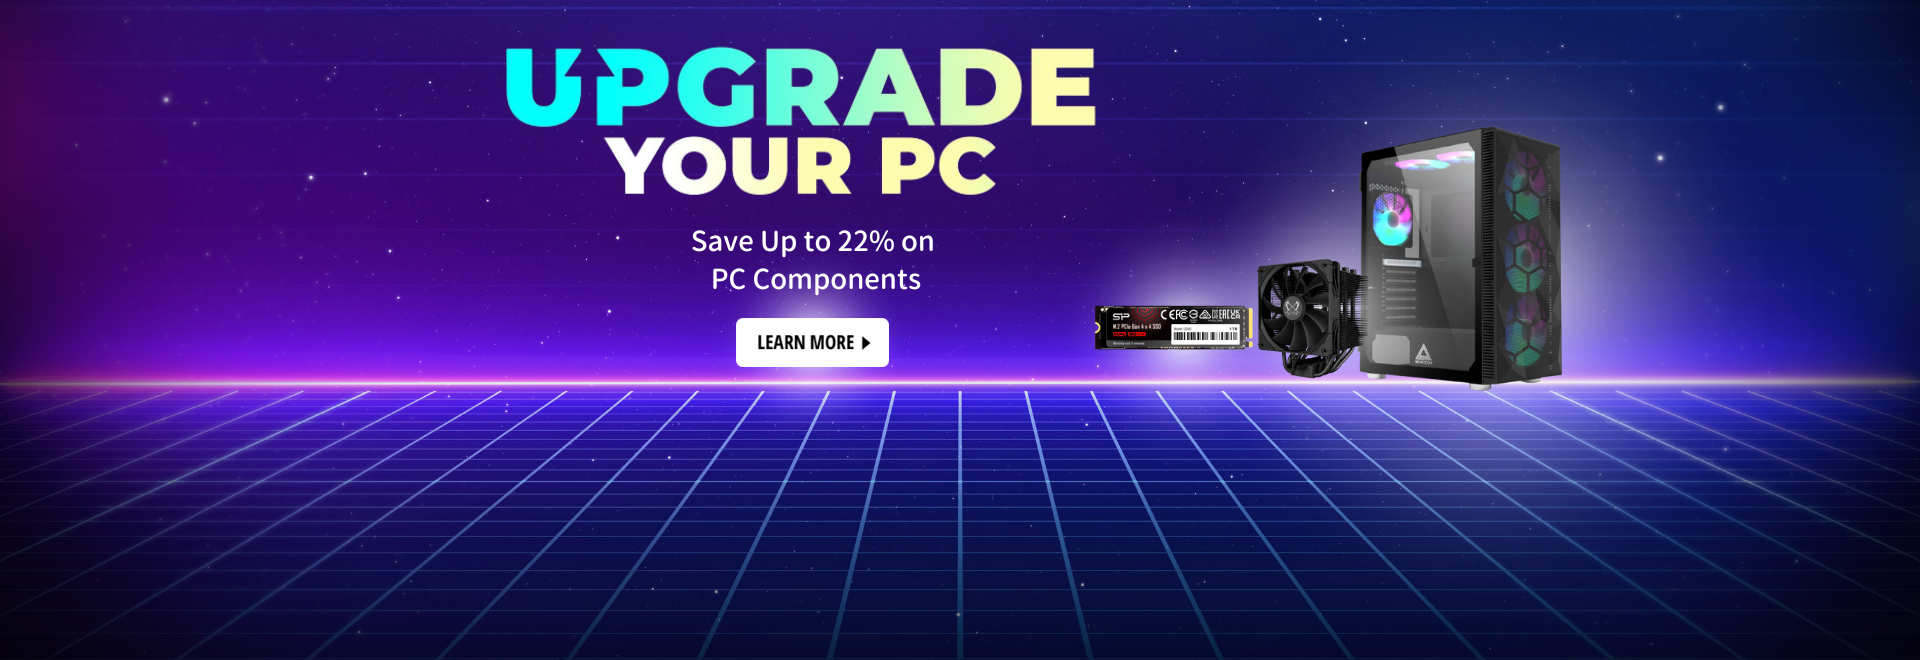 Upgrade Your PC